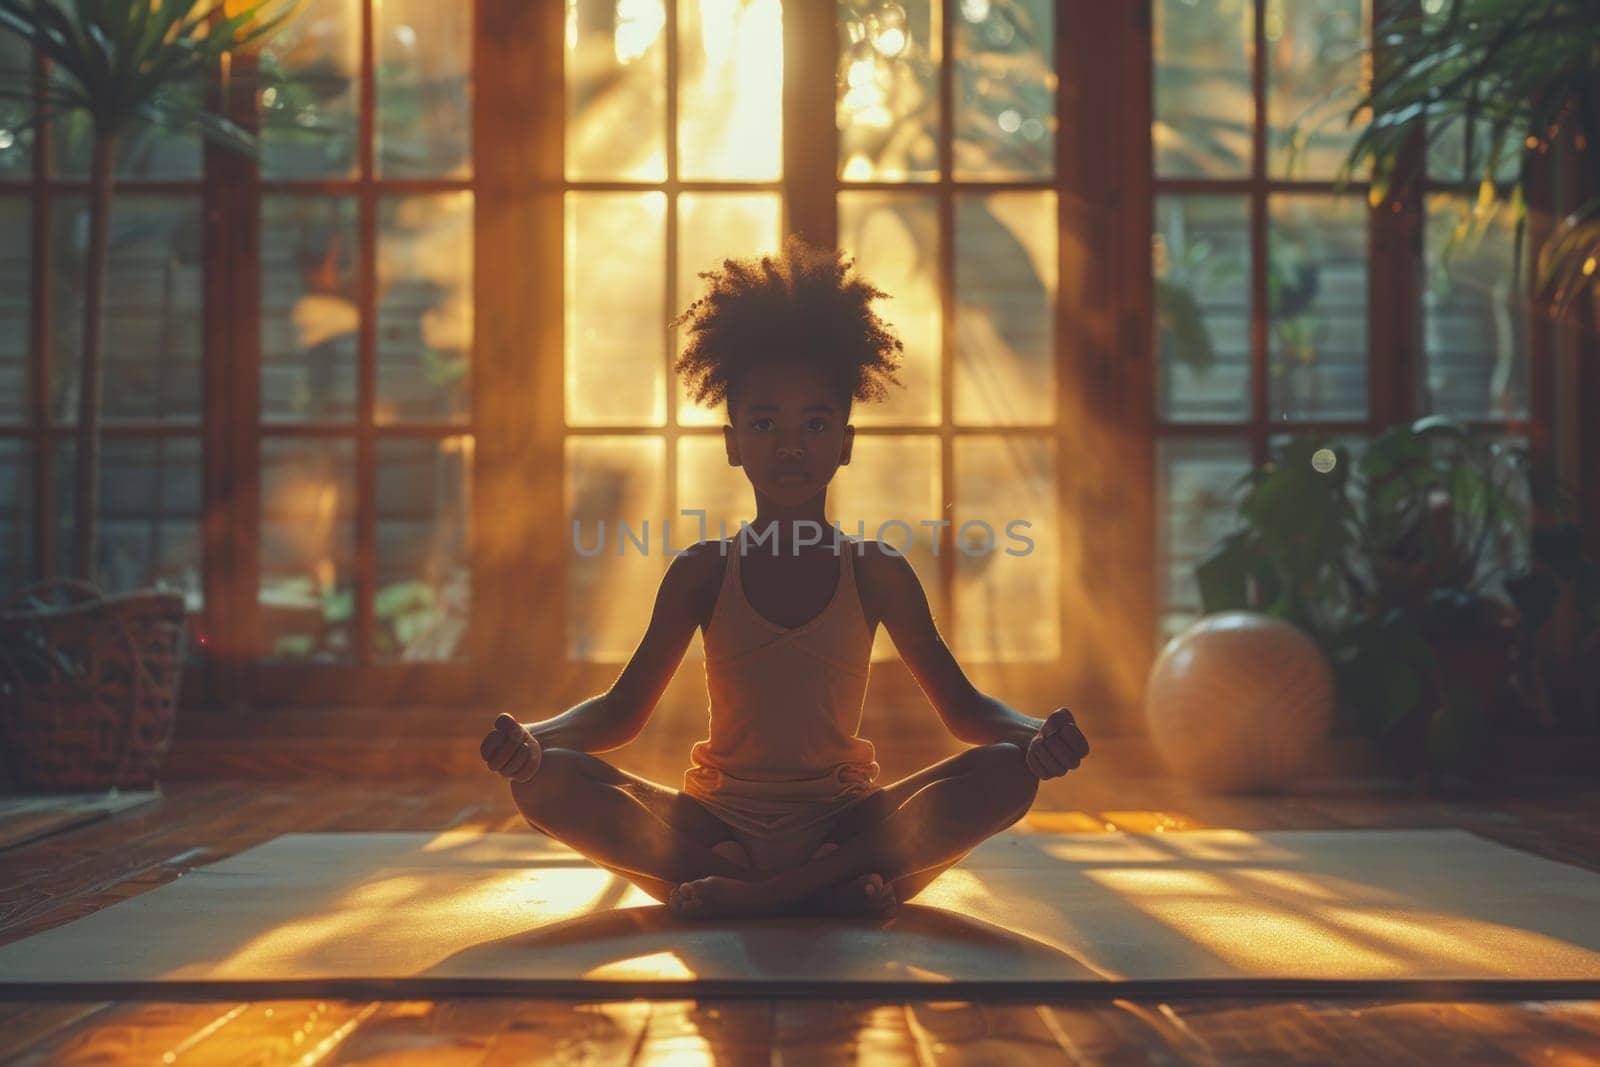 A woman sits in a yoga position in front of a window, focusing on her practice.